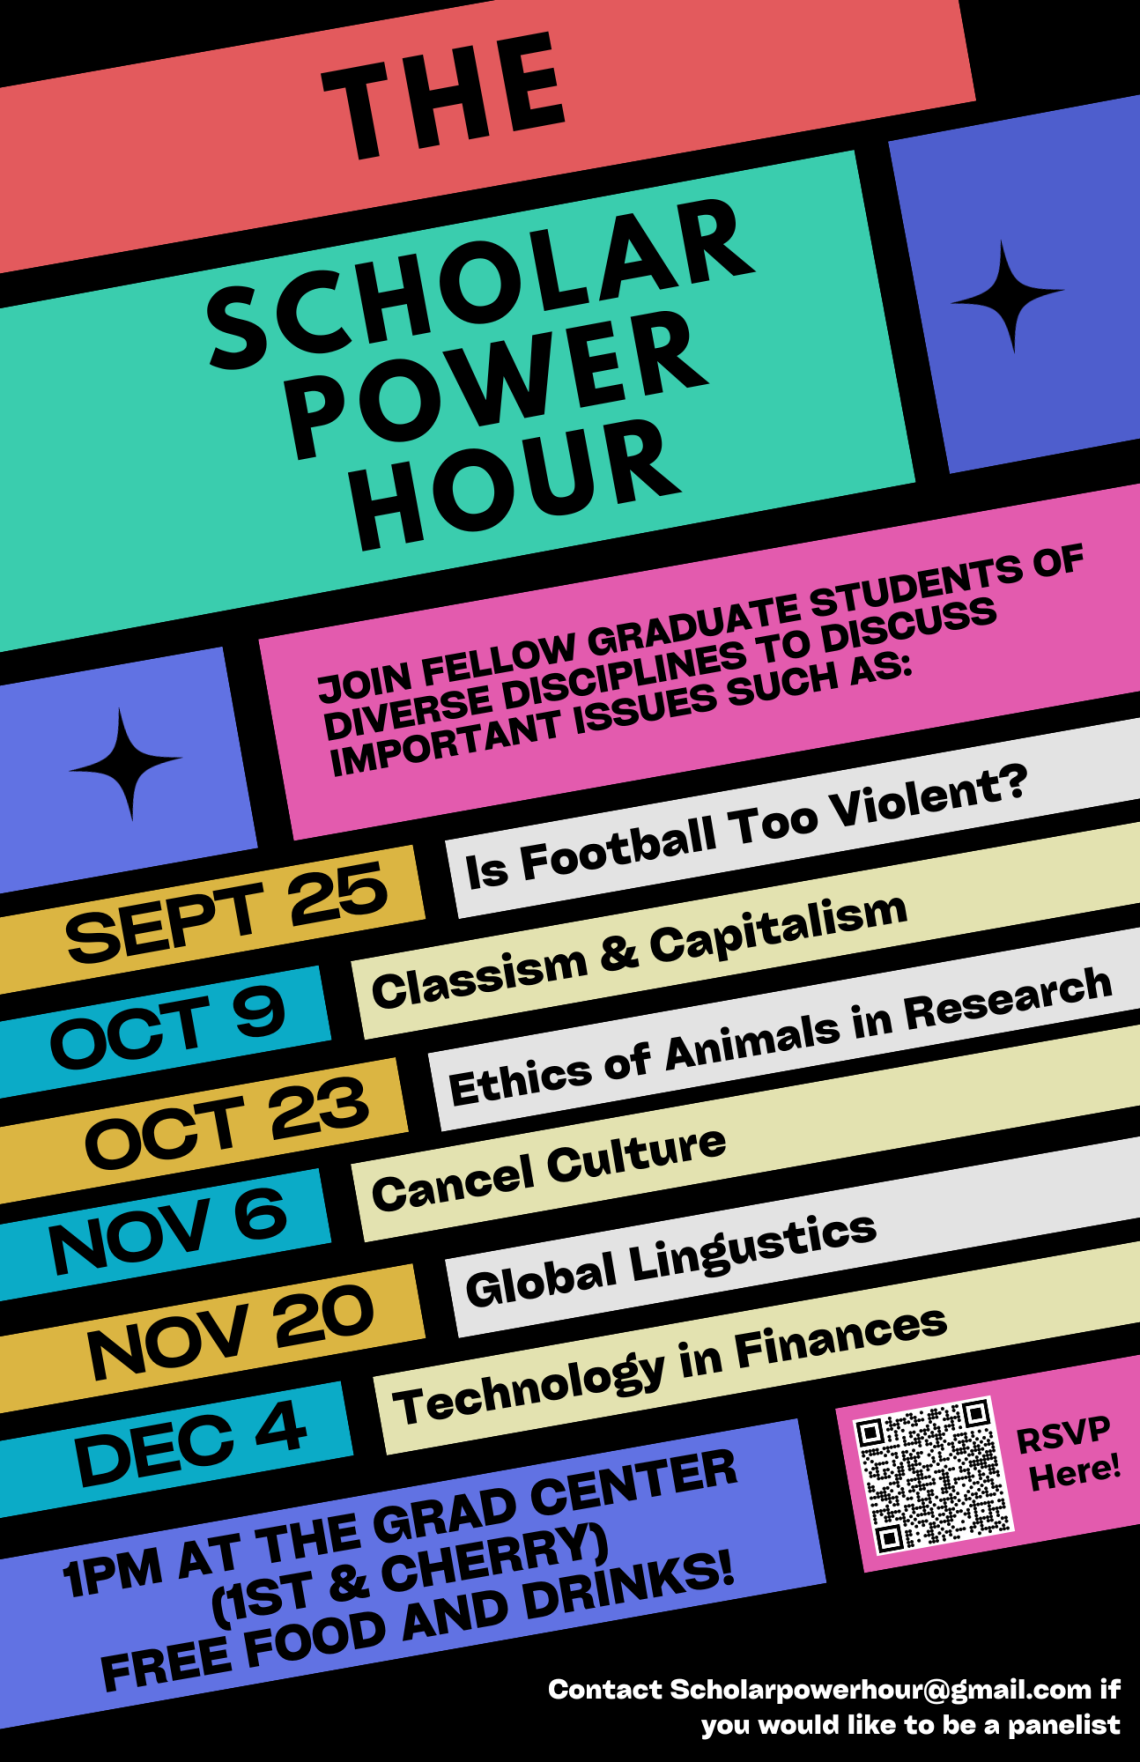 Scholar Power Hour flyer with description, list of sessions, contact email, and QR code to RSVP..